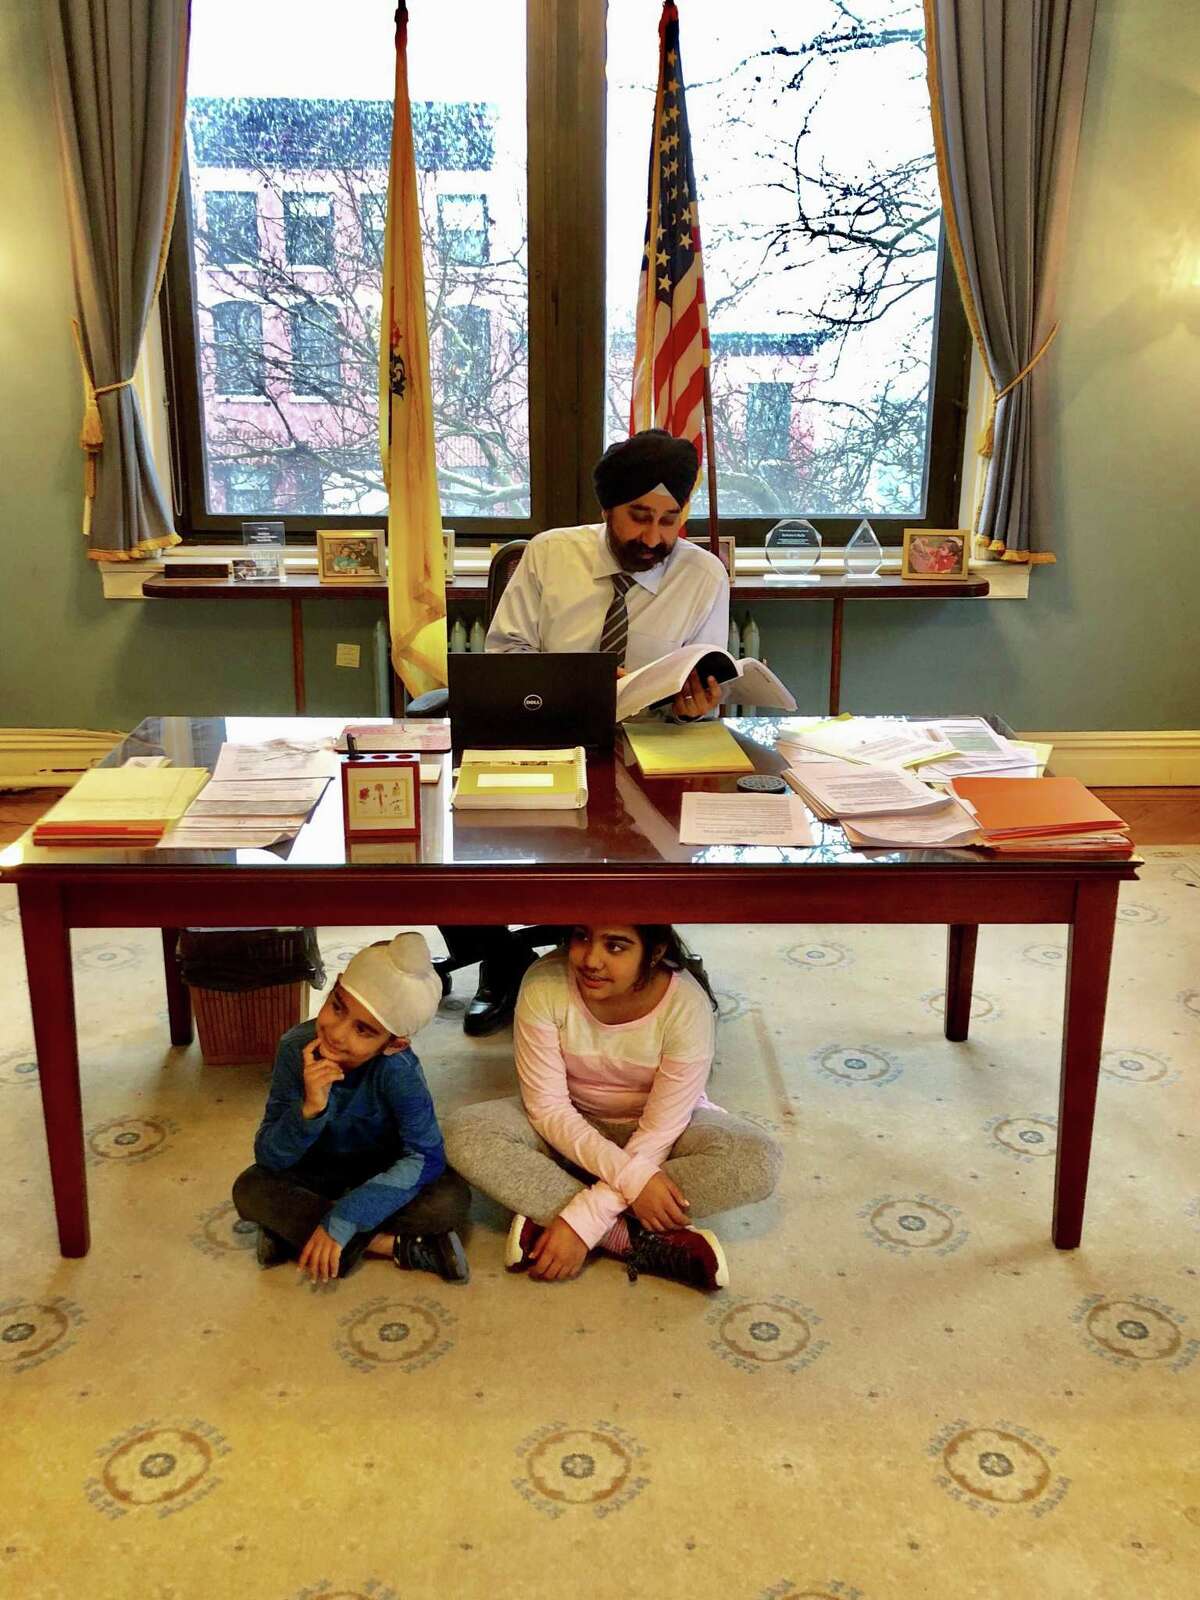 Hoboken Mayor Ravinder Bhalla is at work with his two children, 11-year old daughter Arza Kaur and 7-year old son Shabegh Singh, nearby.